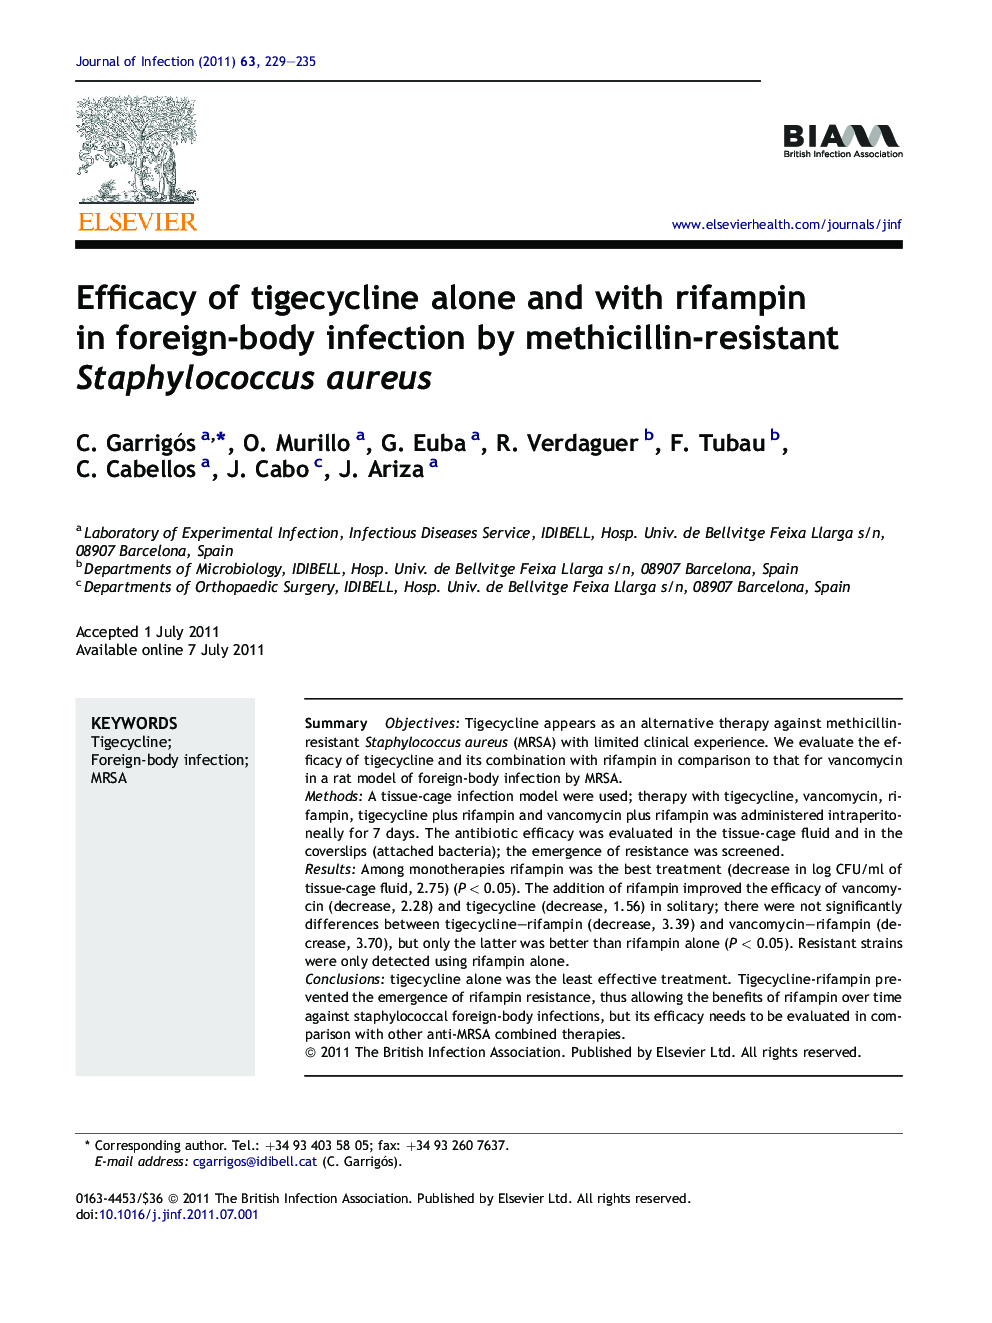 Efficacy of tigecycline alone and with rifampin in foreign-body infection by methicillin-resistant Staphylococcus aureus